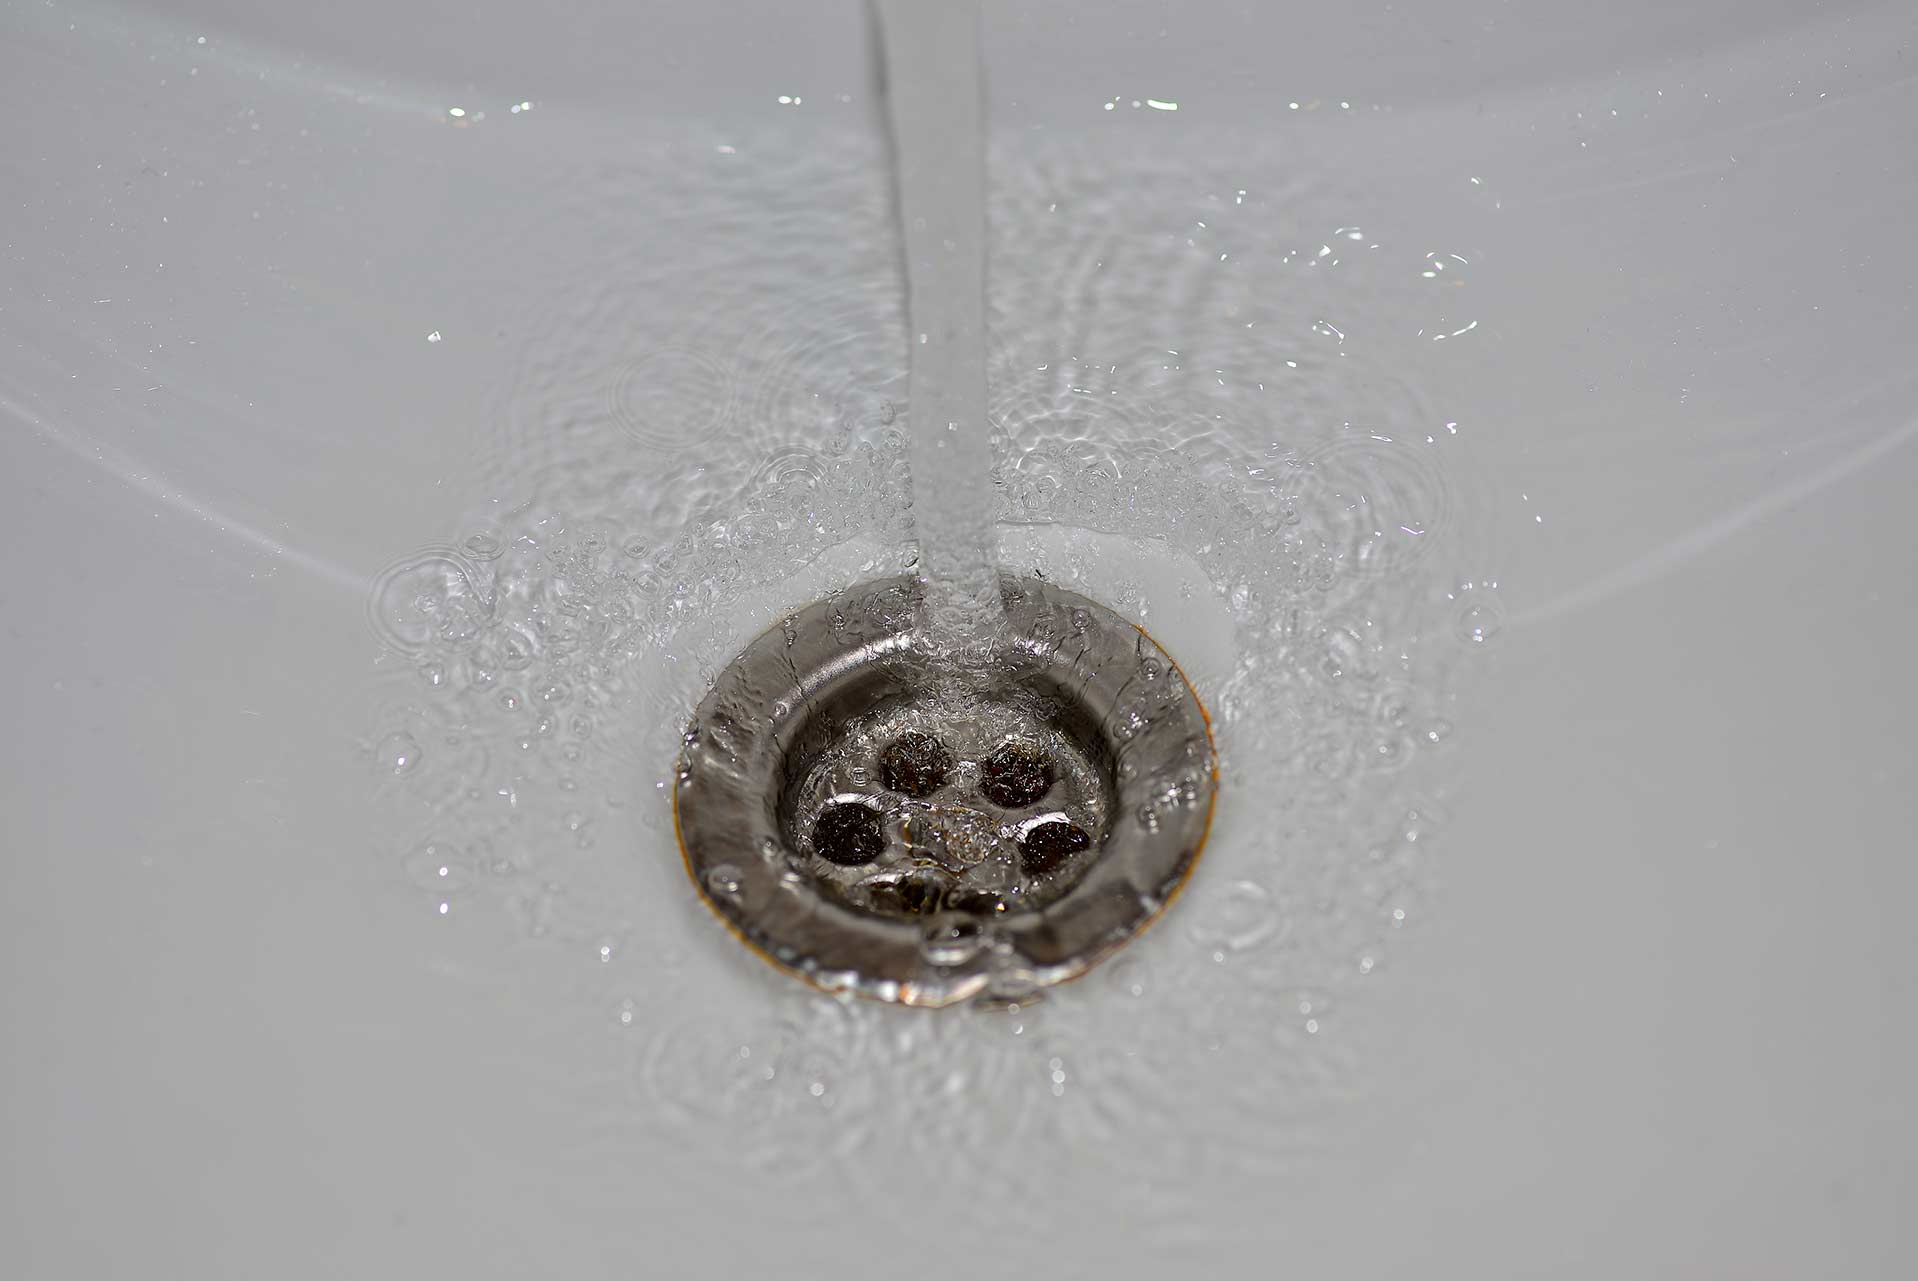 A2B Drains provides services to unblock blocked sinks and drains for properties in Woodbridge.